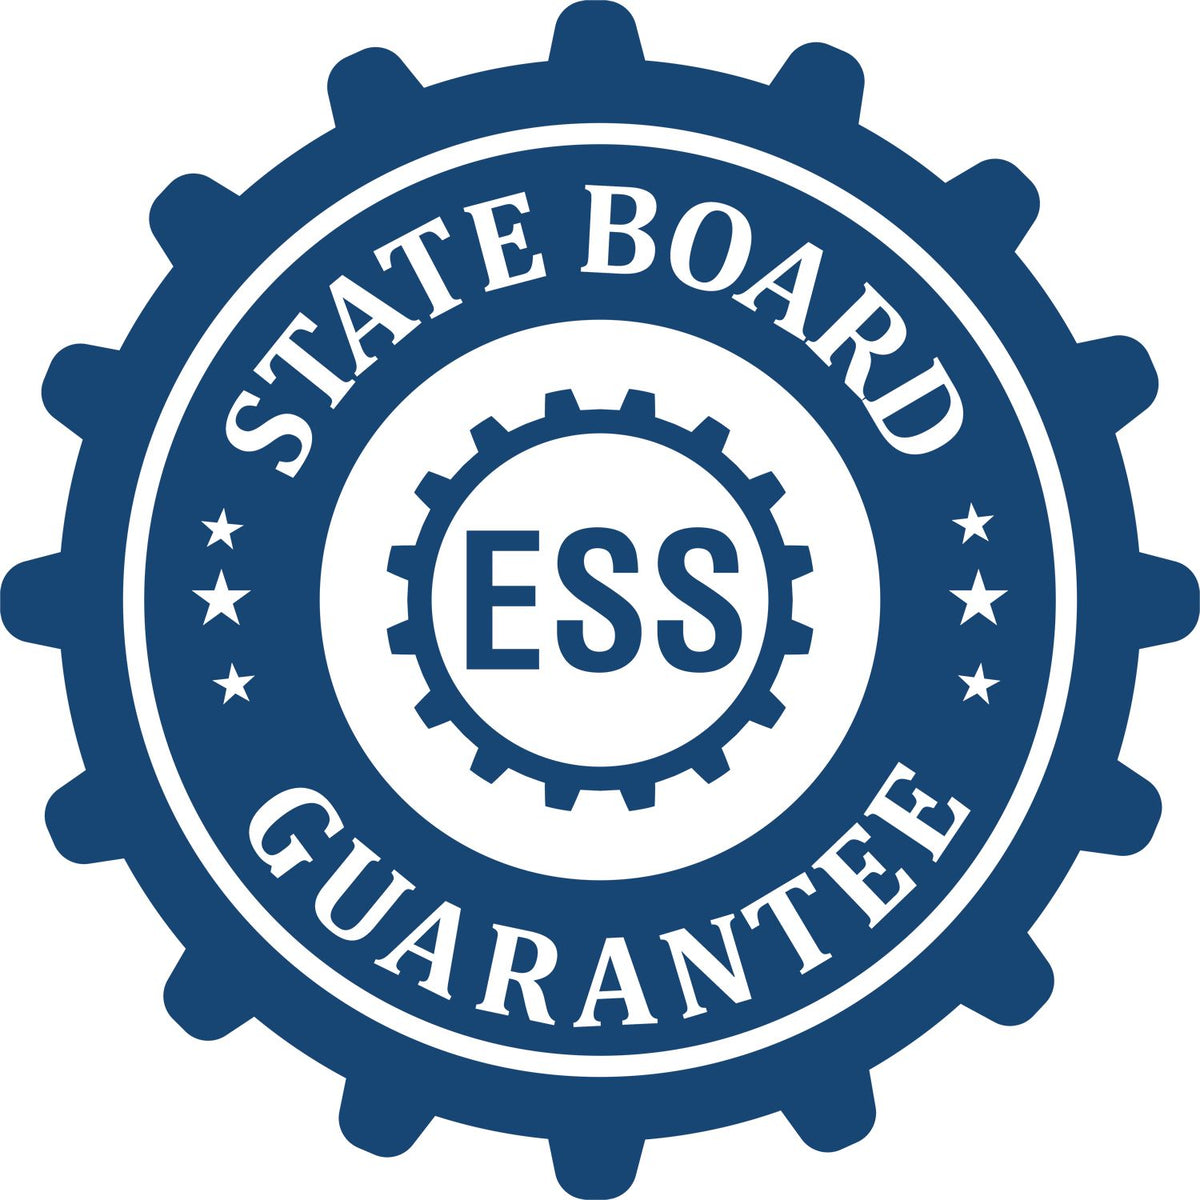 An emblem in a gear shape illustrating a state board guarantee for the Ohio Landscape Architectural Seal Stamp product.